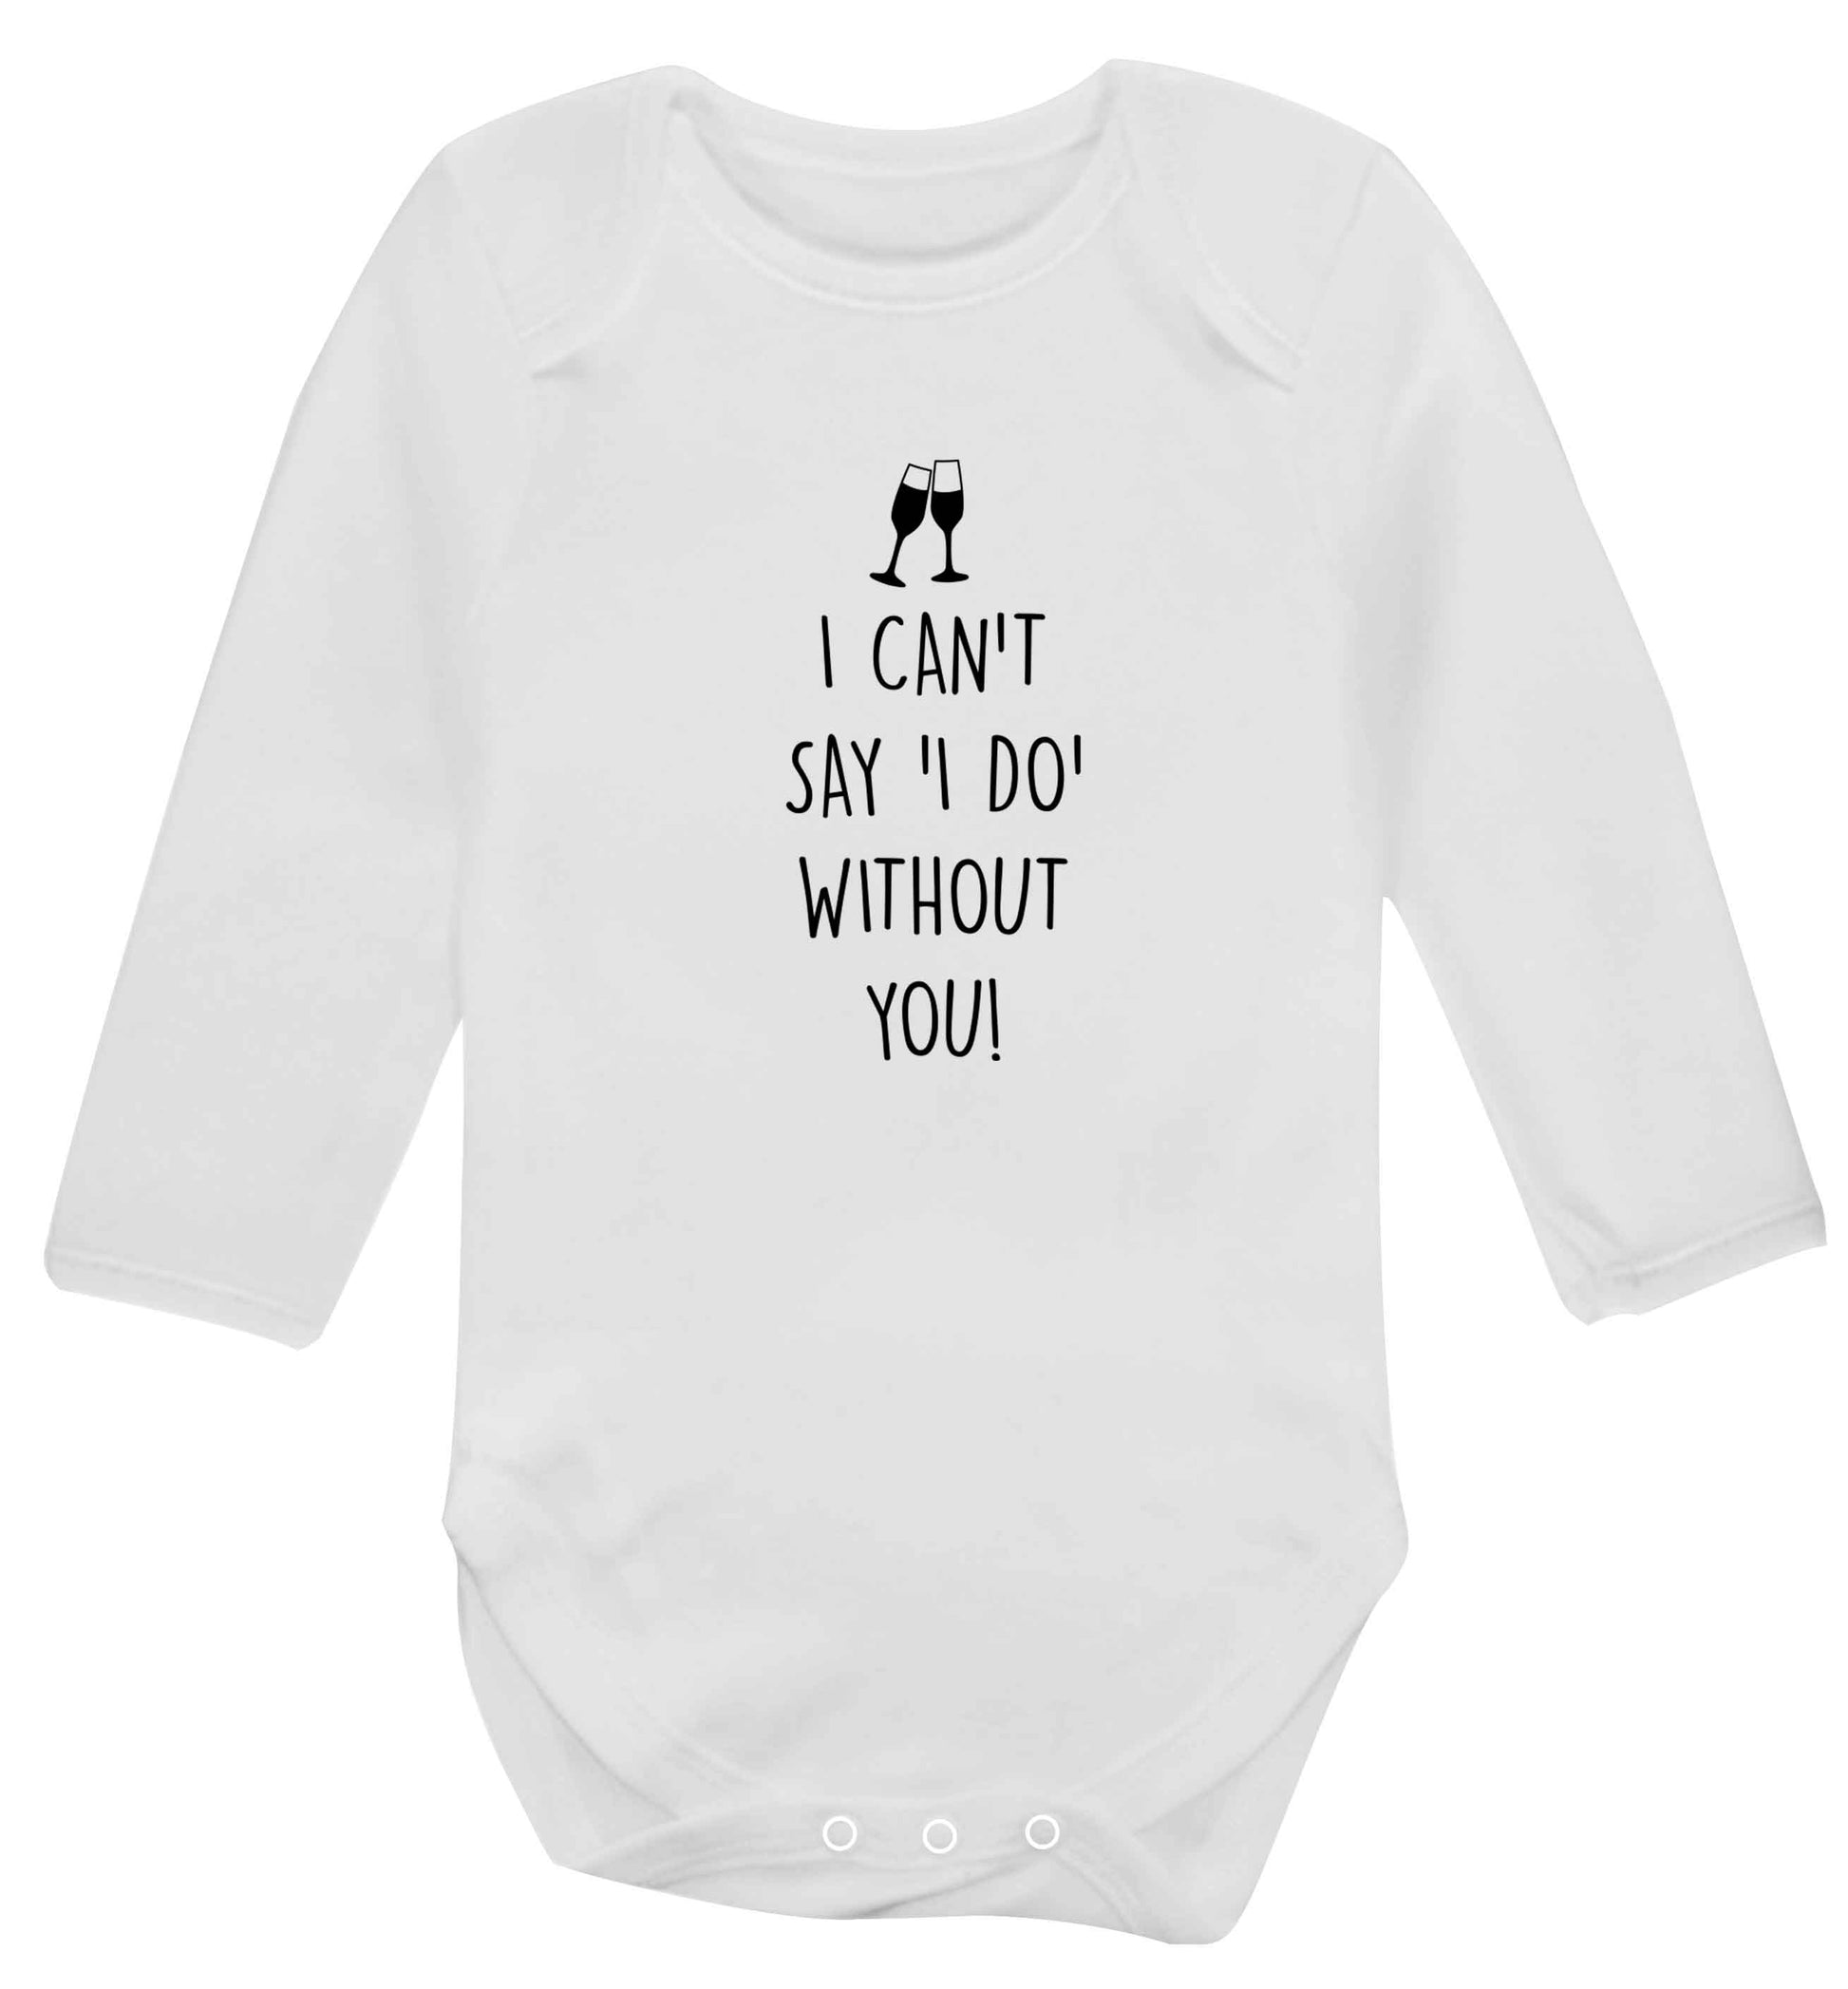 I can't say 'I do' without you! baby vest long sleeved white 6-12 months